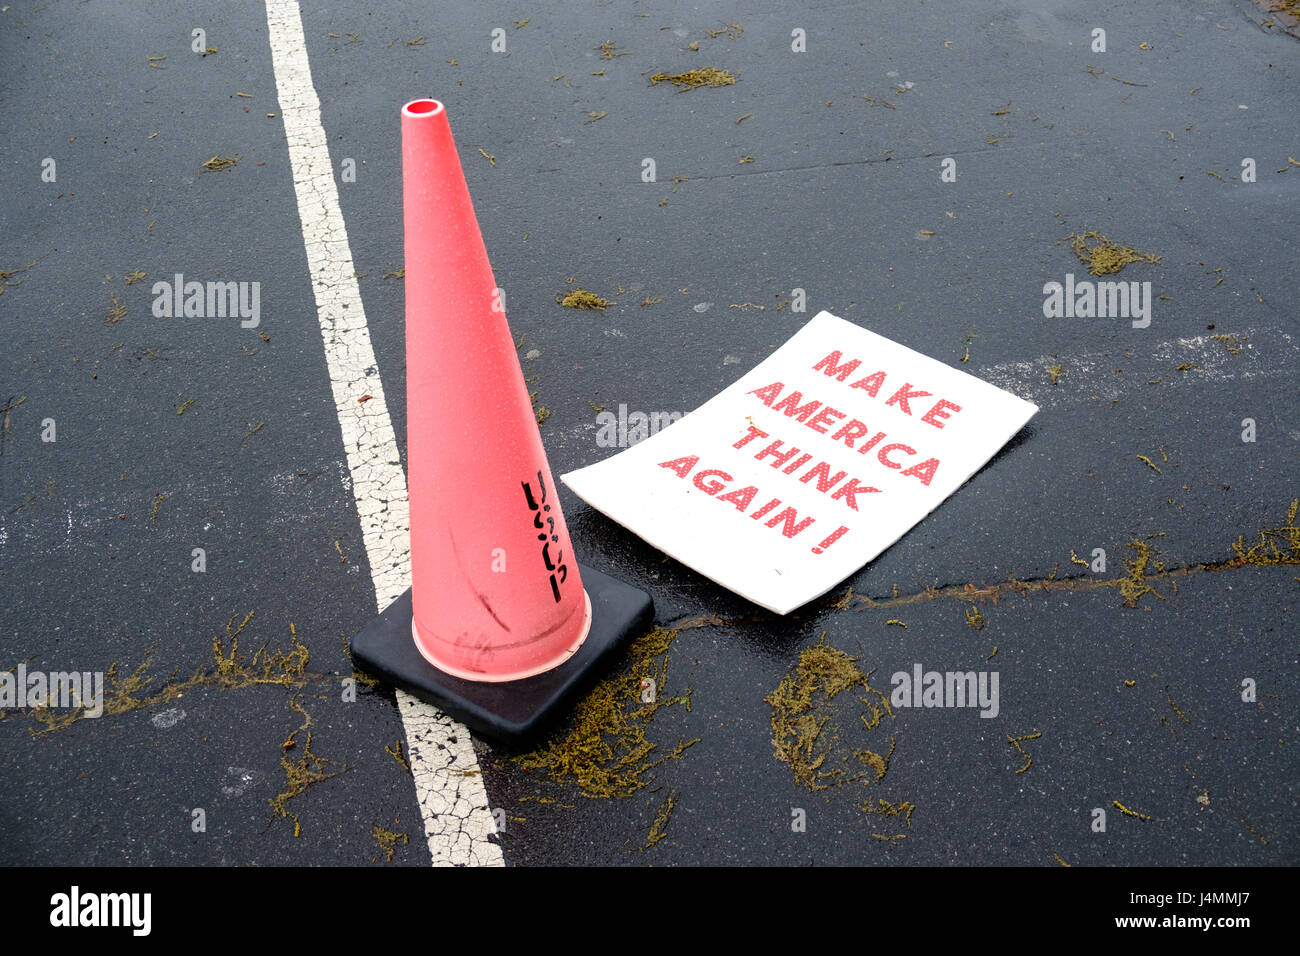 Placard and posters discarded after the March for Science rally on Earth Day, Washington DC, USA, April 22, 2017. Stock Photo